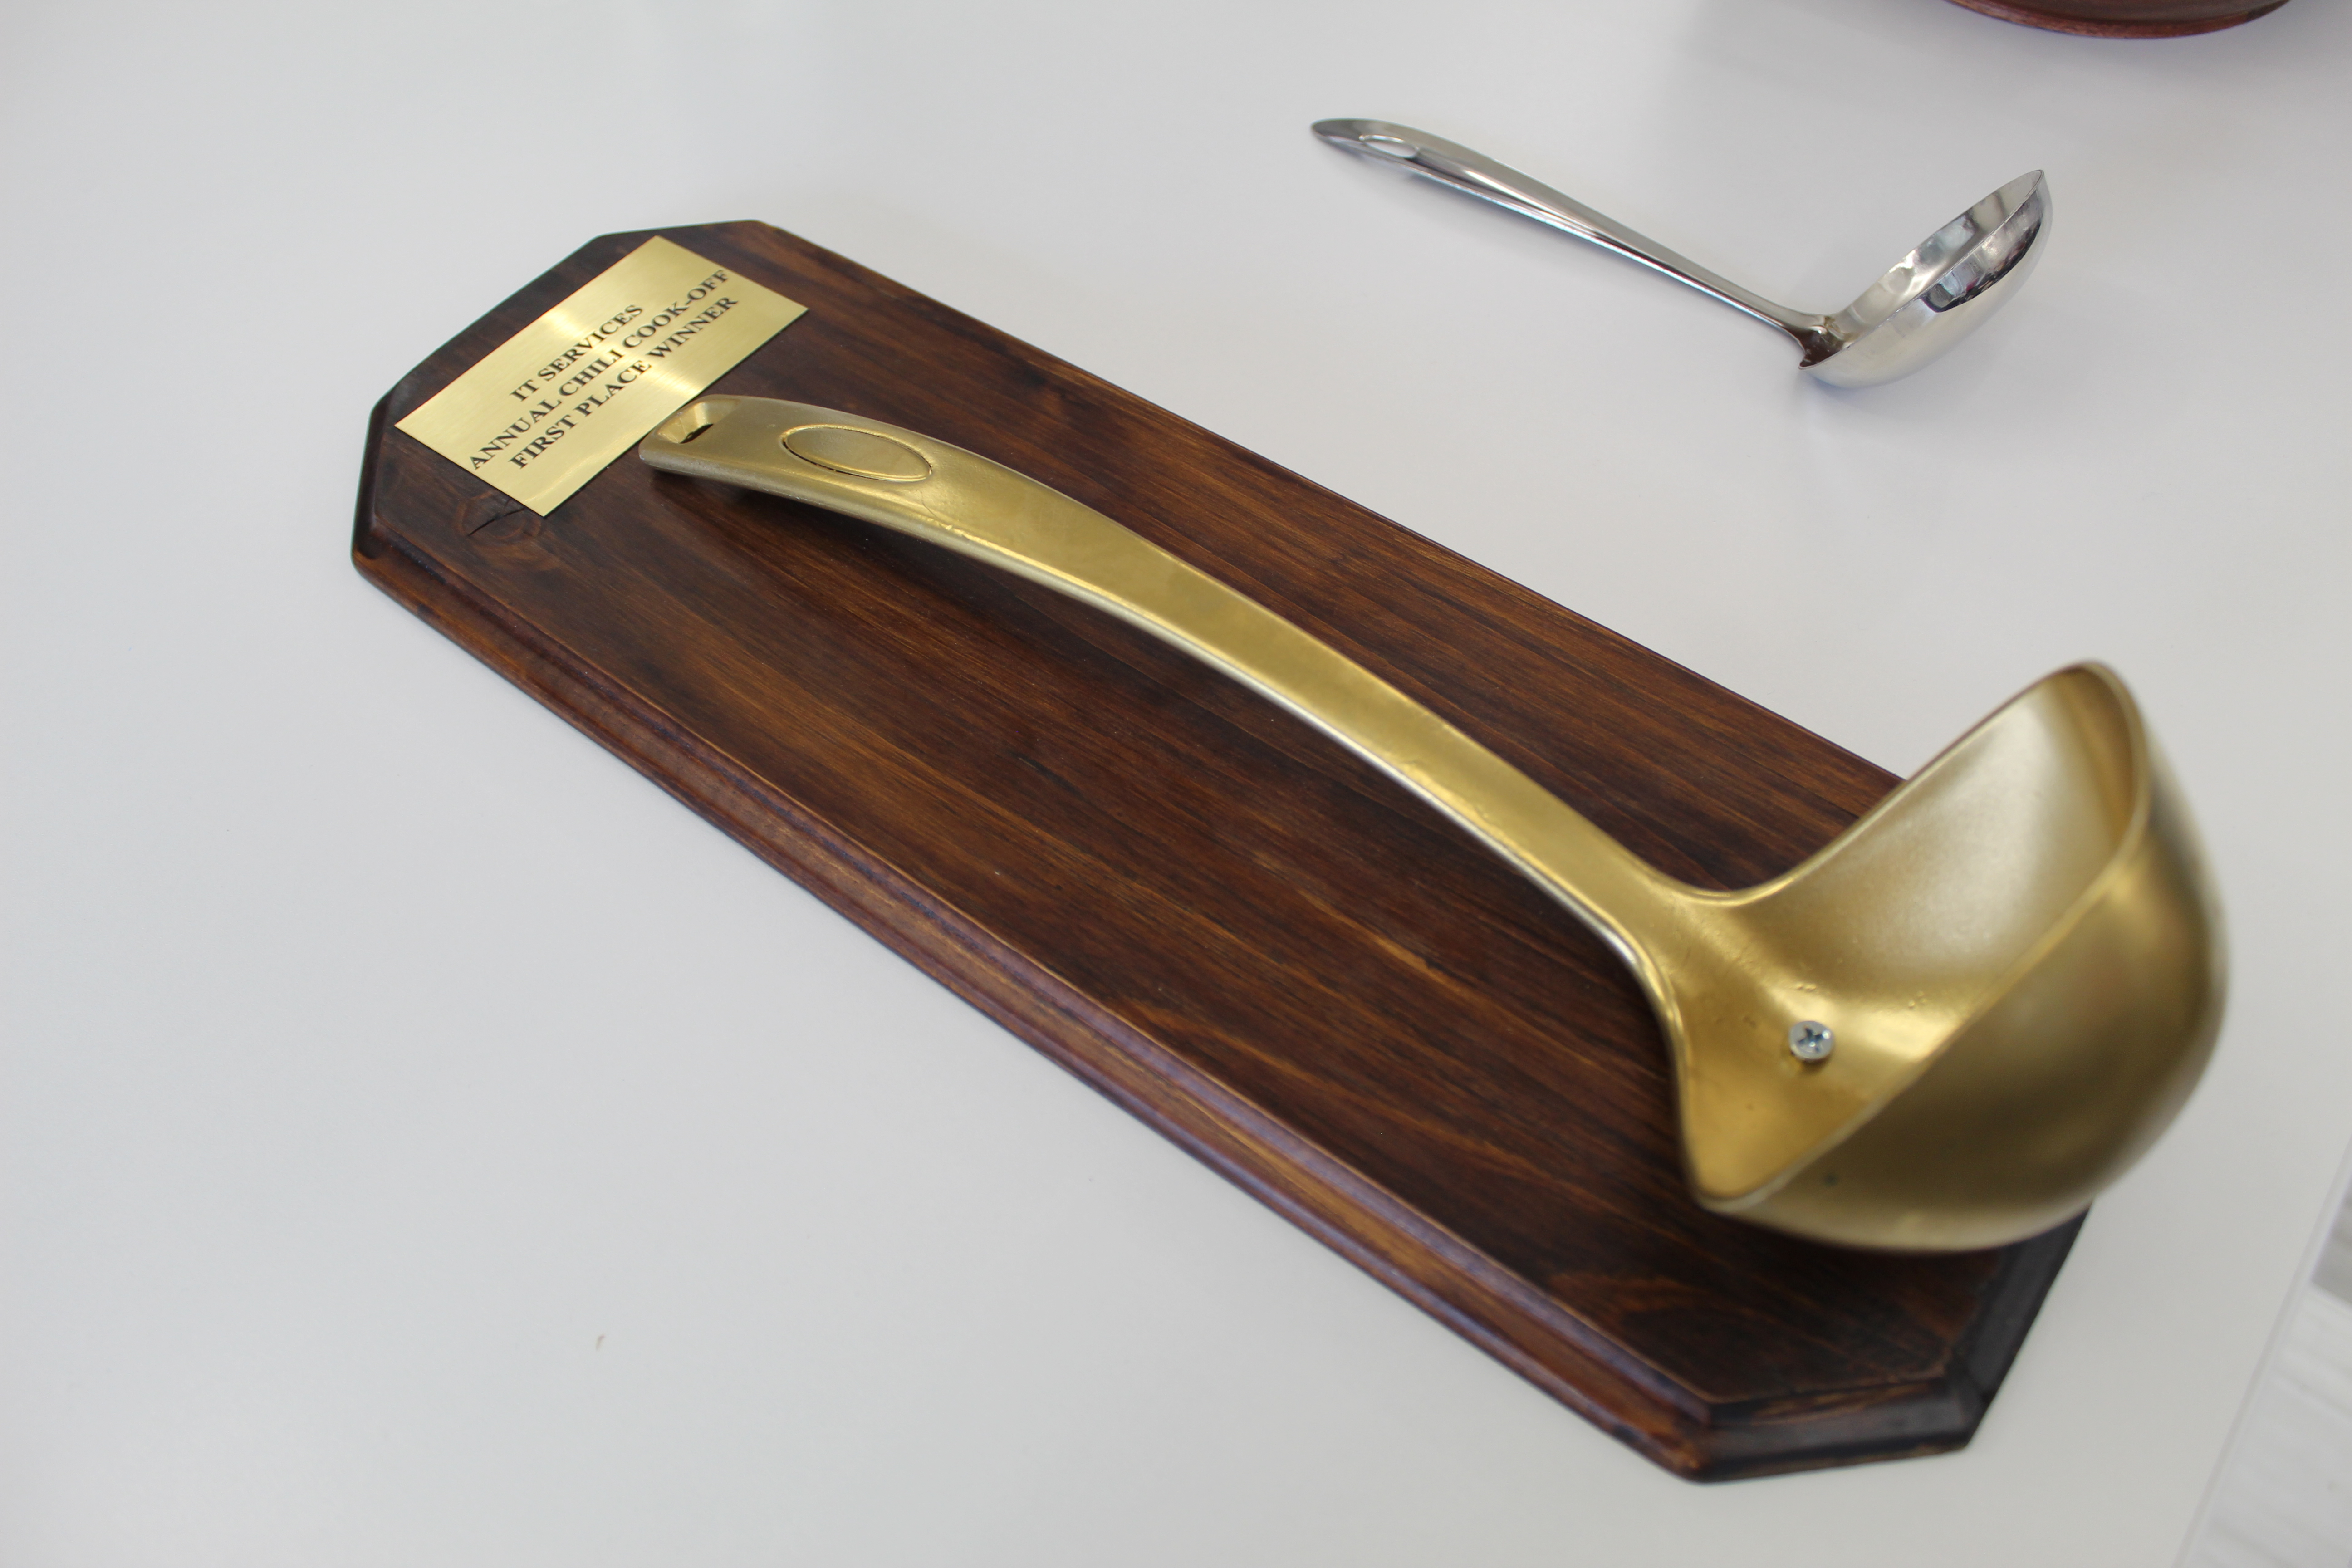 A golden ladle on a wooden plaque. The plaque says IT Services Annual Chili Competition First Place Winner